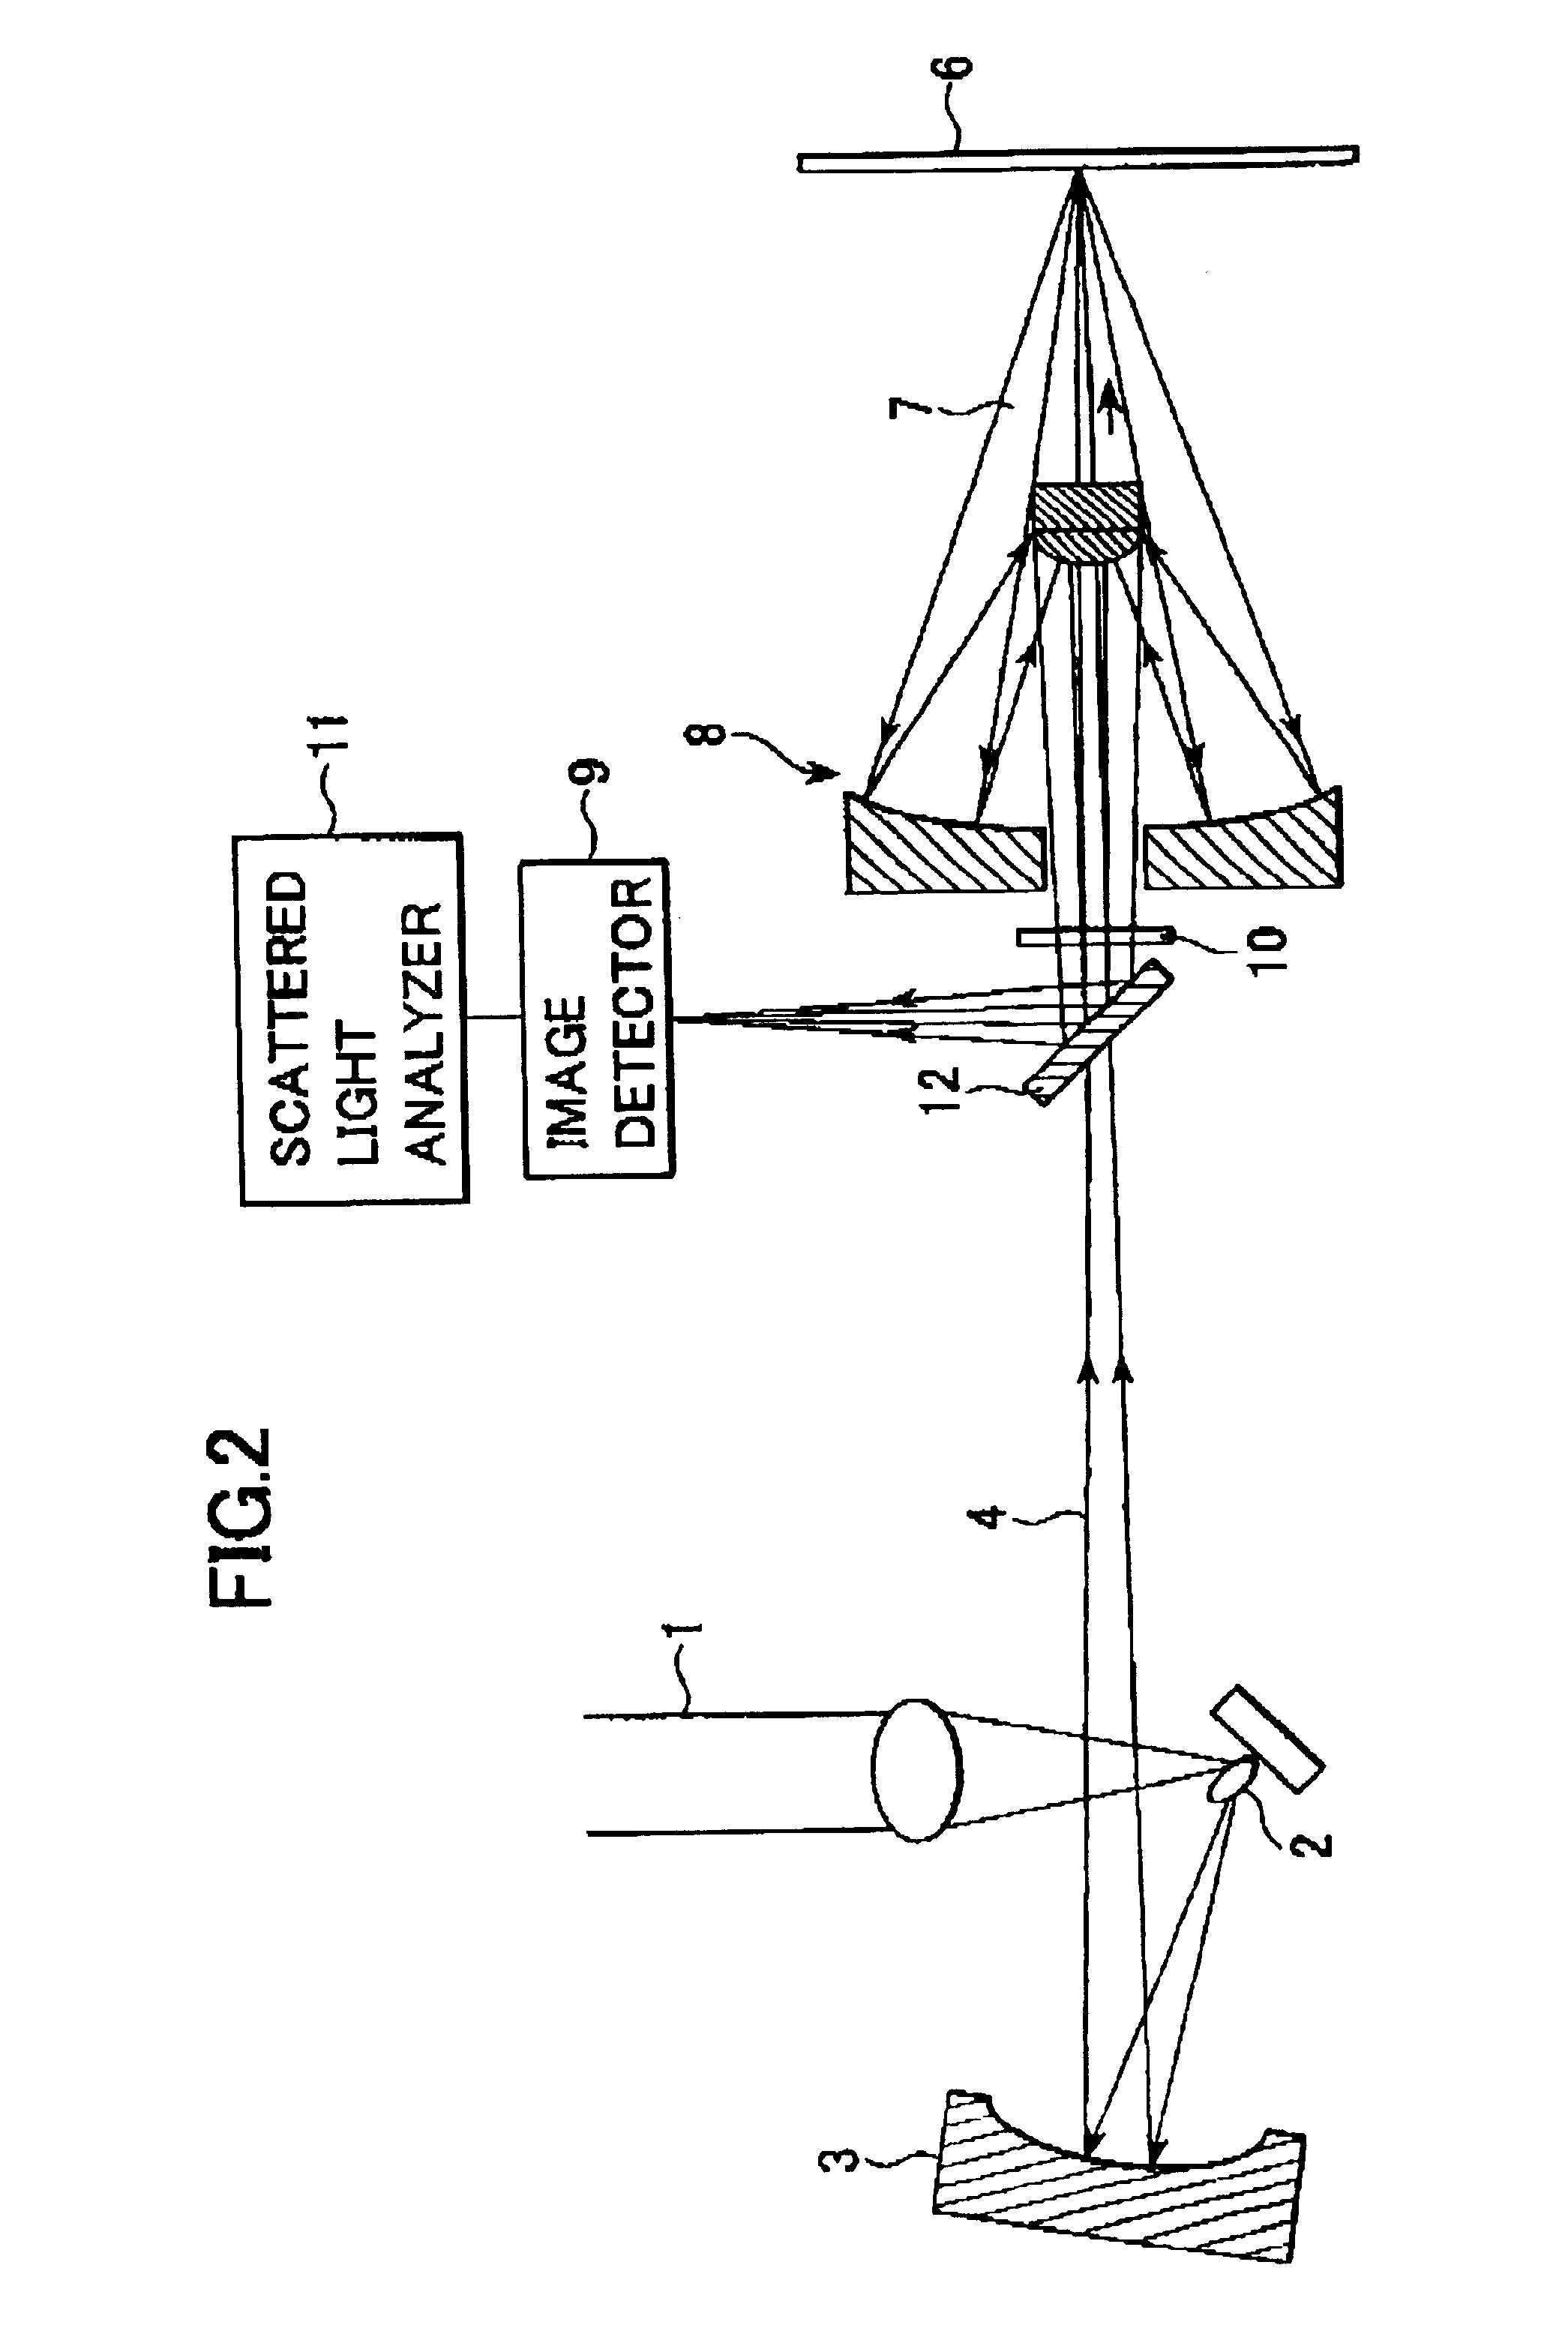 Method and apparatus for inspecting multilayer masks for defects